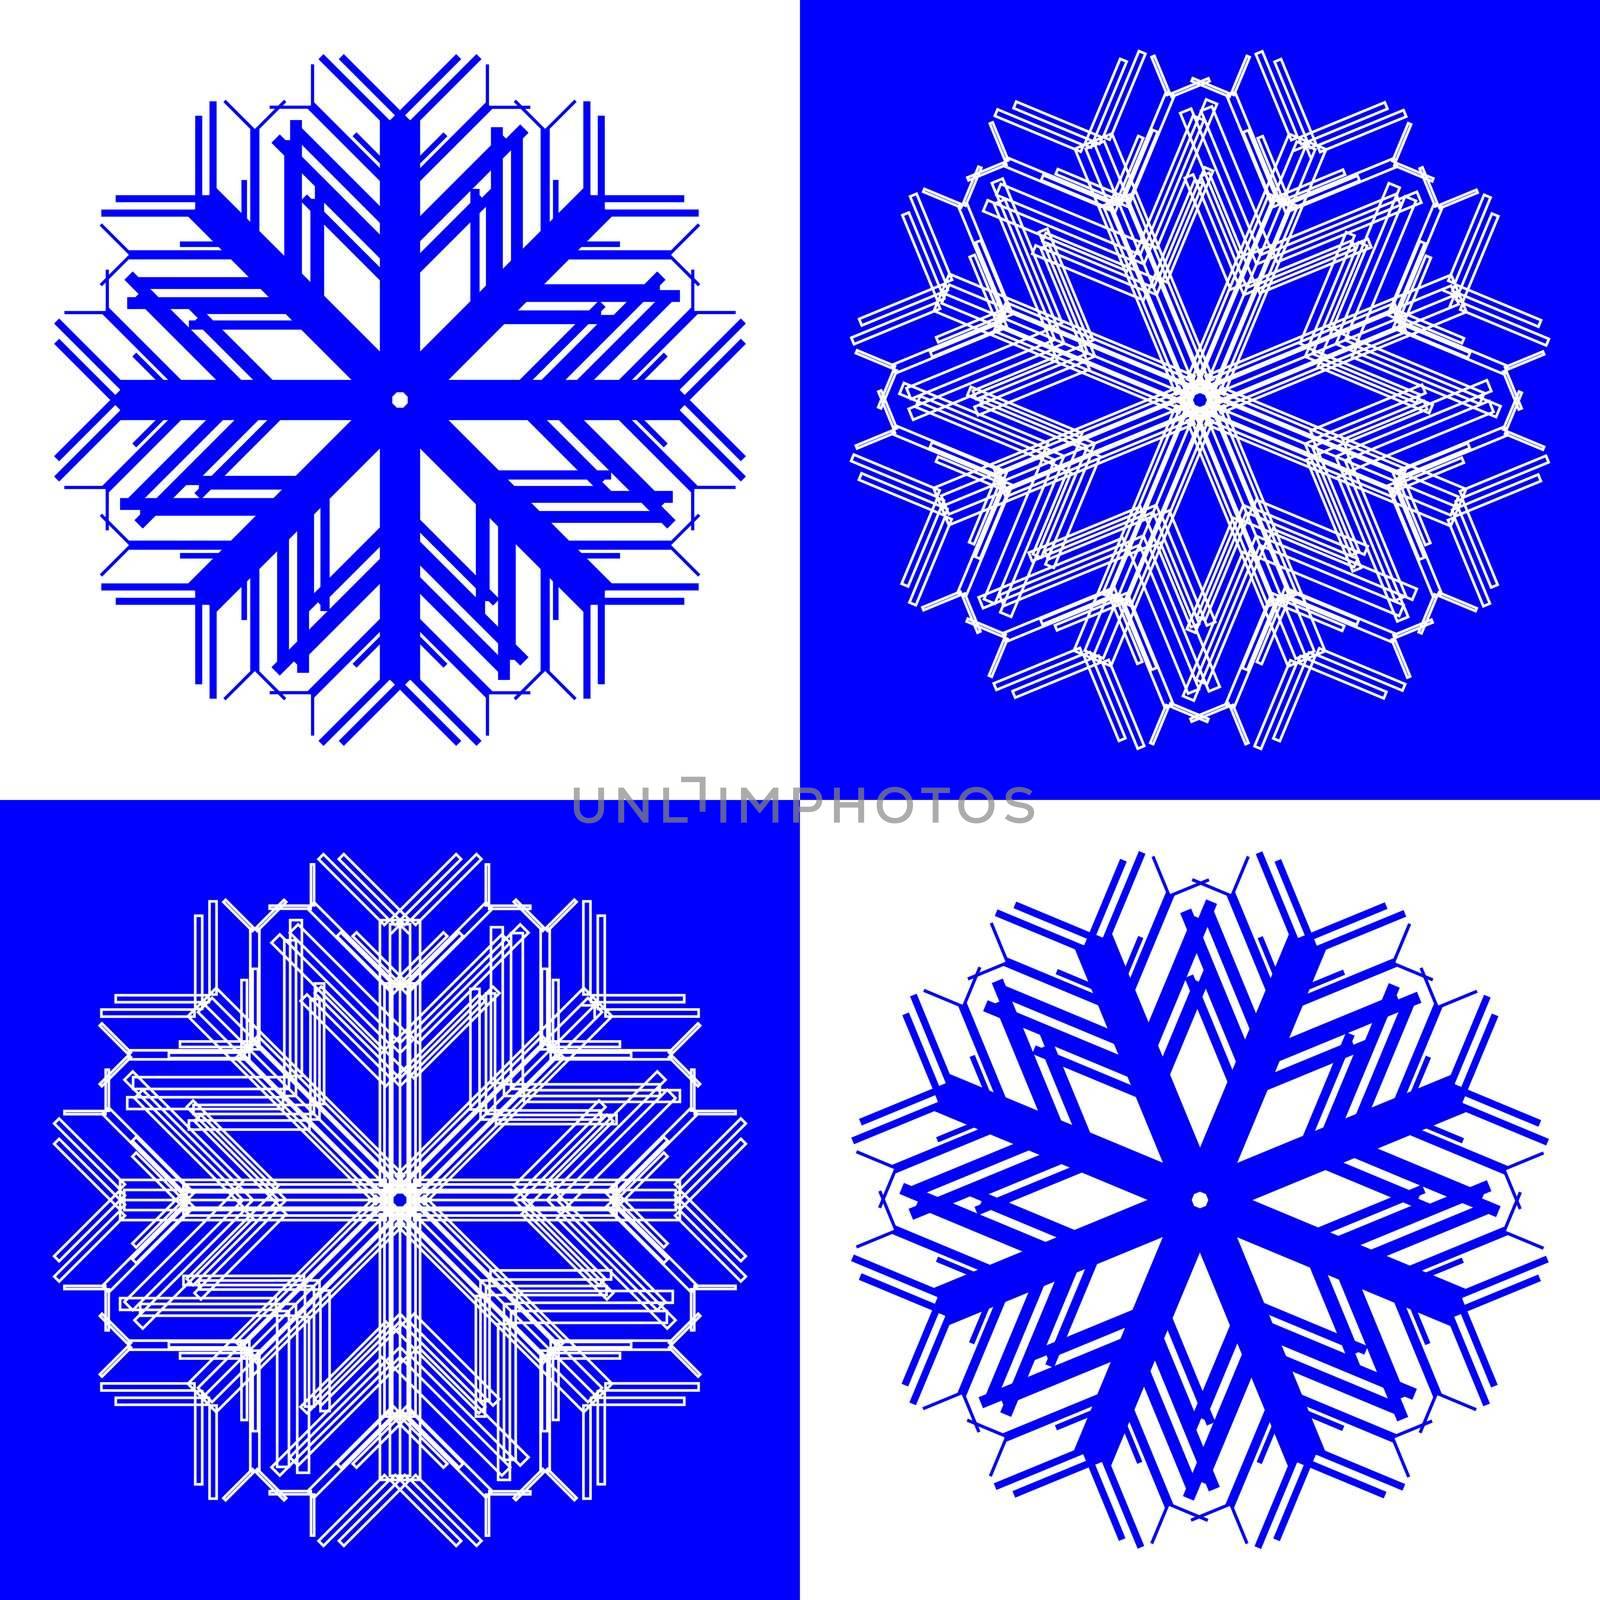 snow flakes, vector art illustration; easy to change colors